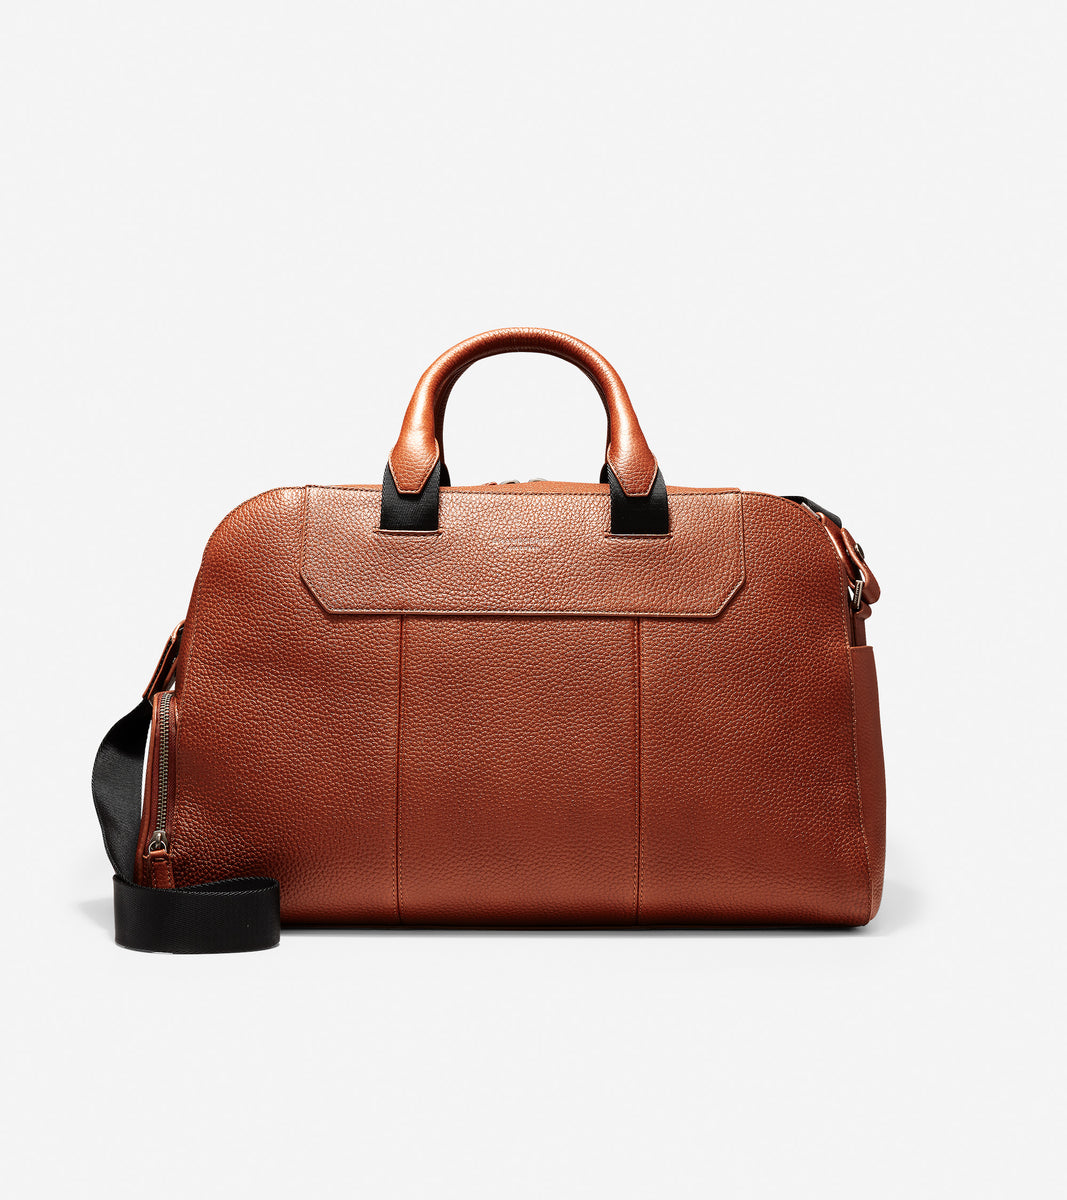 ColeHaan-GRANDSERIES Leather Duffle-f11321-British Tan Leather